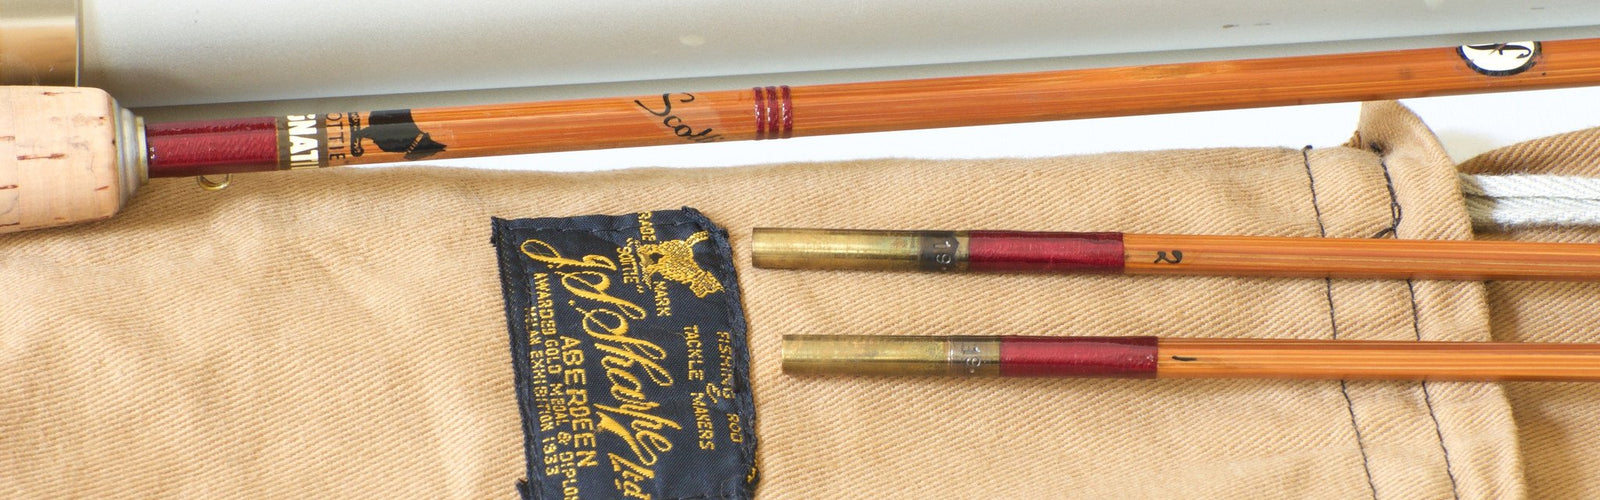 807. J.W. Young Spin Reel — R.W. Summers Bamboo Fly Rods Company